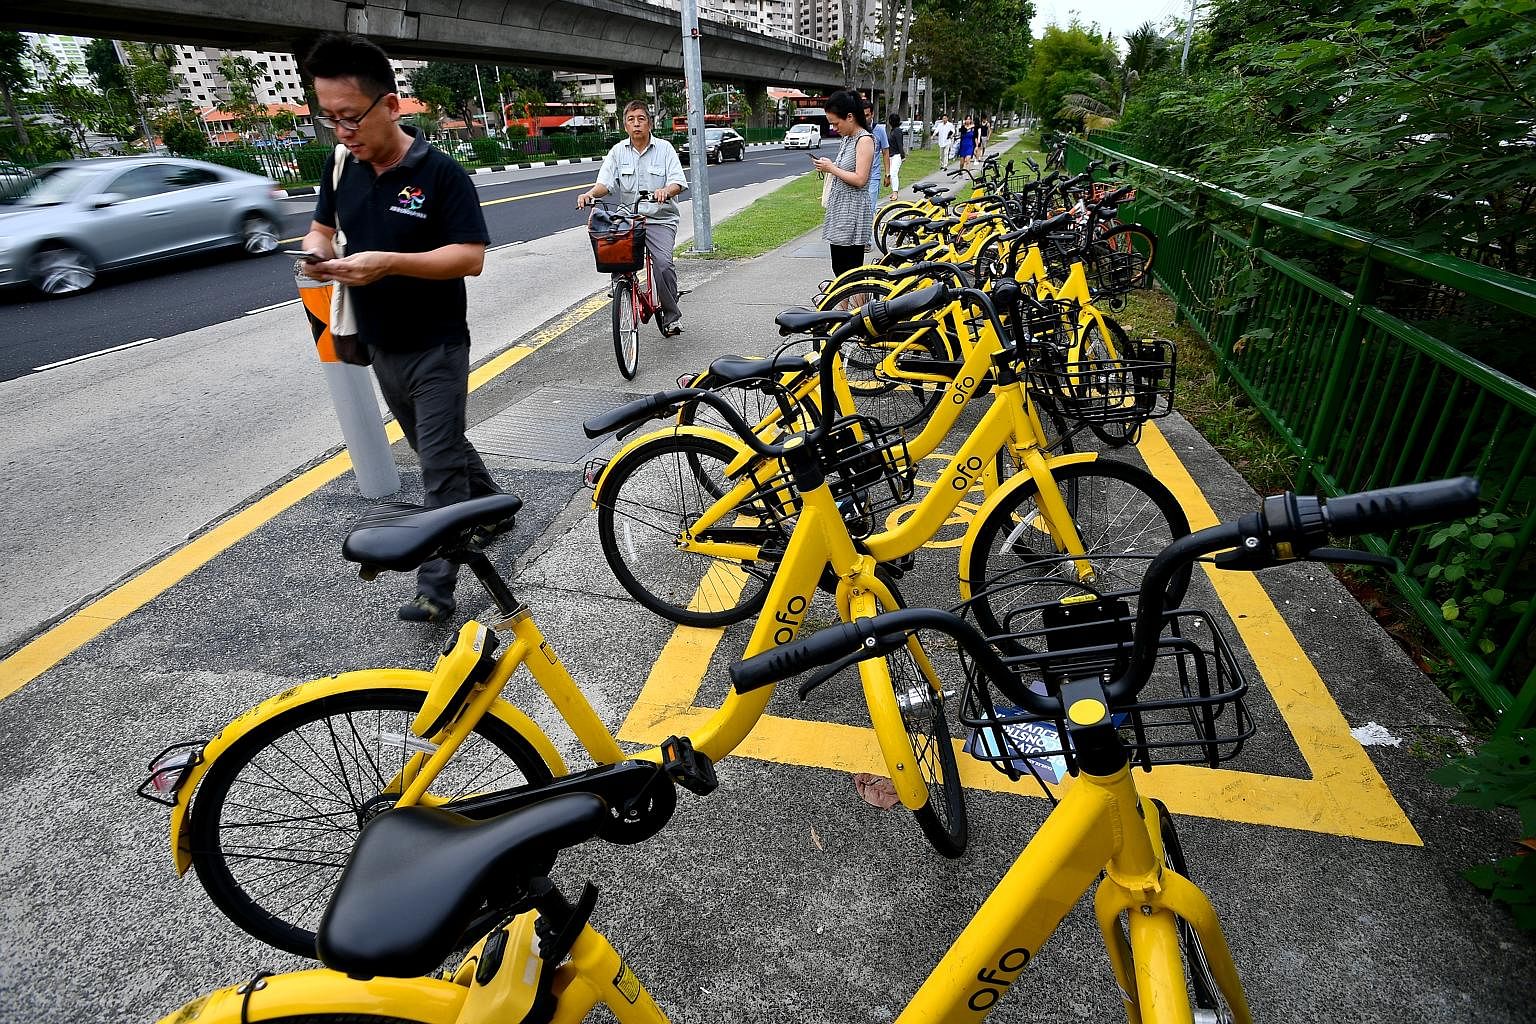 Ofo, which had been allowed to operate 25,000 two-wheelers under the Land Transport Authority's licensing scheme, later requested that this number be slashed to 10,000. It had cited difficulty in meeting its financial obligations.